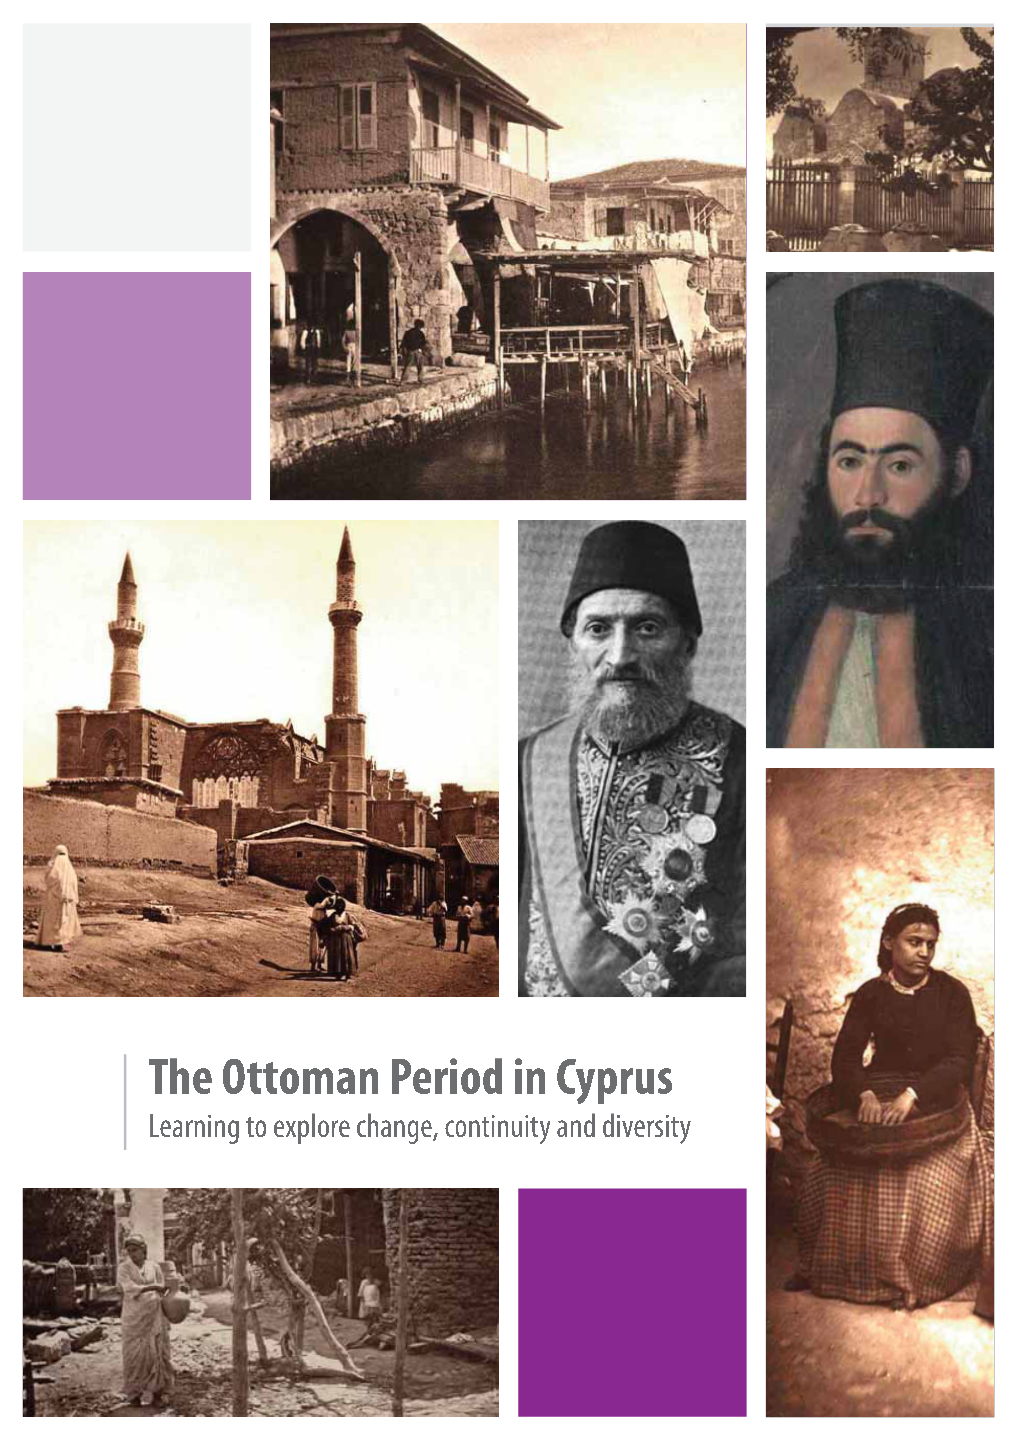 ENQUIRY QUESTION: Why Is It Hard to Tell the Story of Ottoman Cyprus?